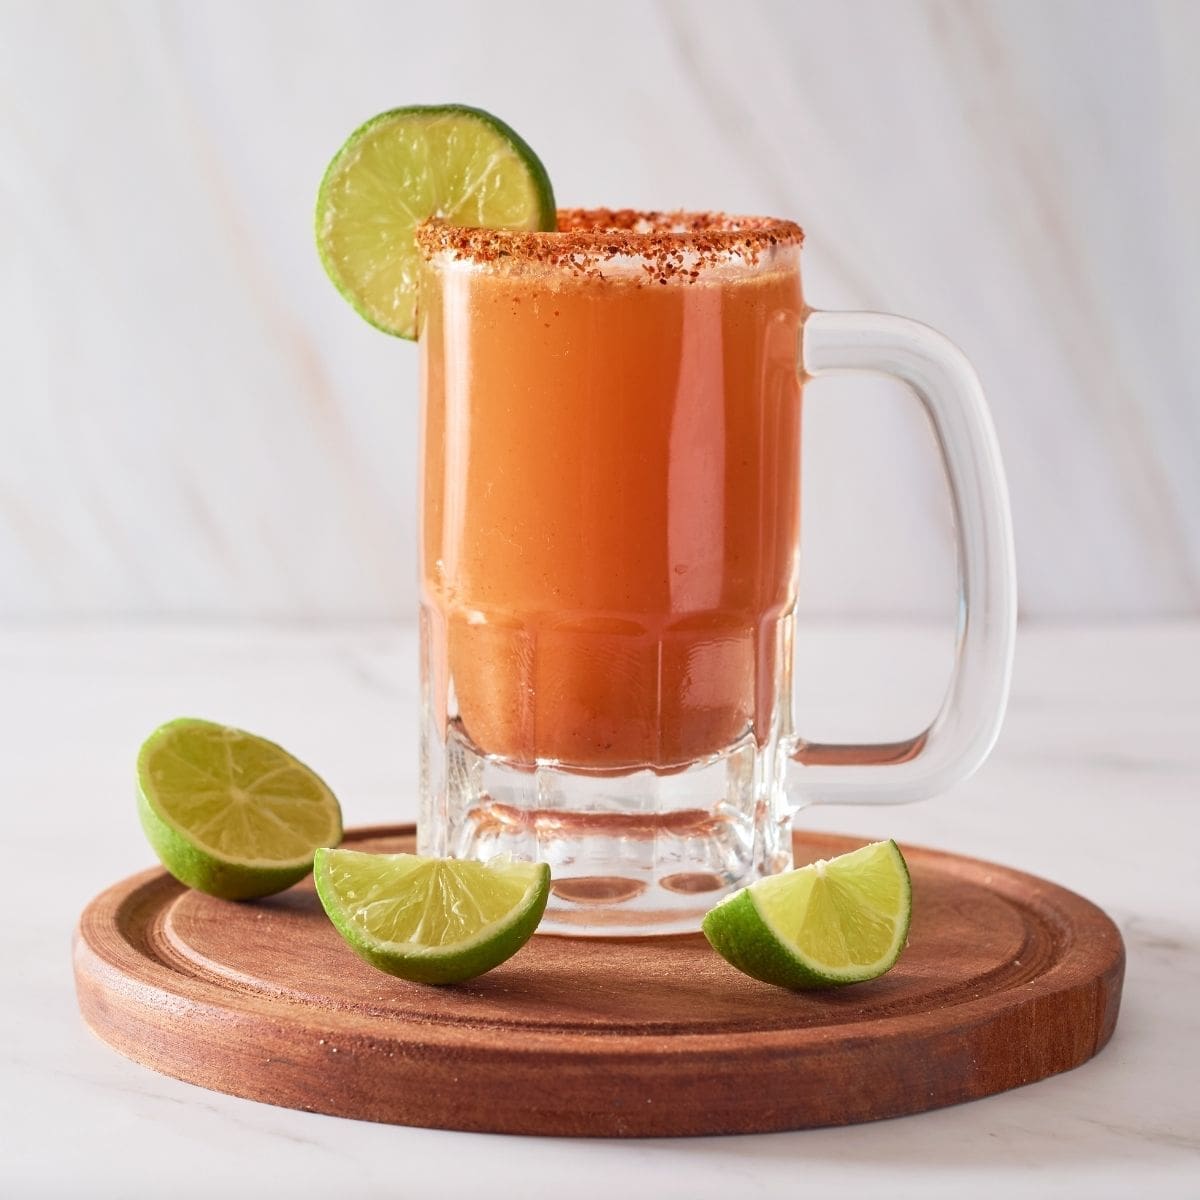 23 Refreshing Mixed Drinks For Your Mexican Night Escapade! 💃🏿